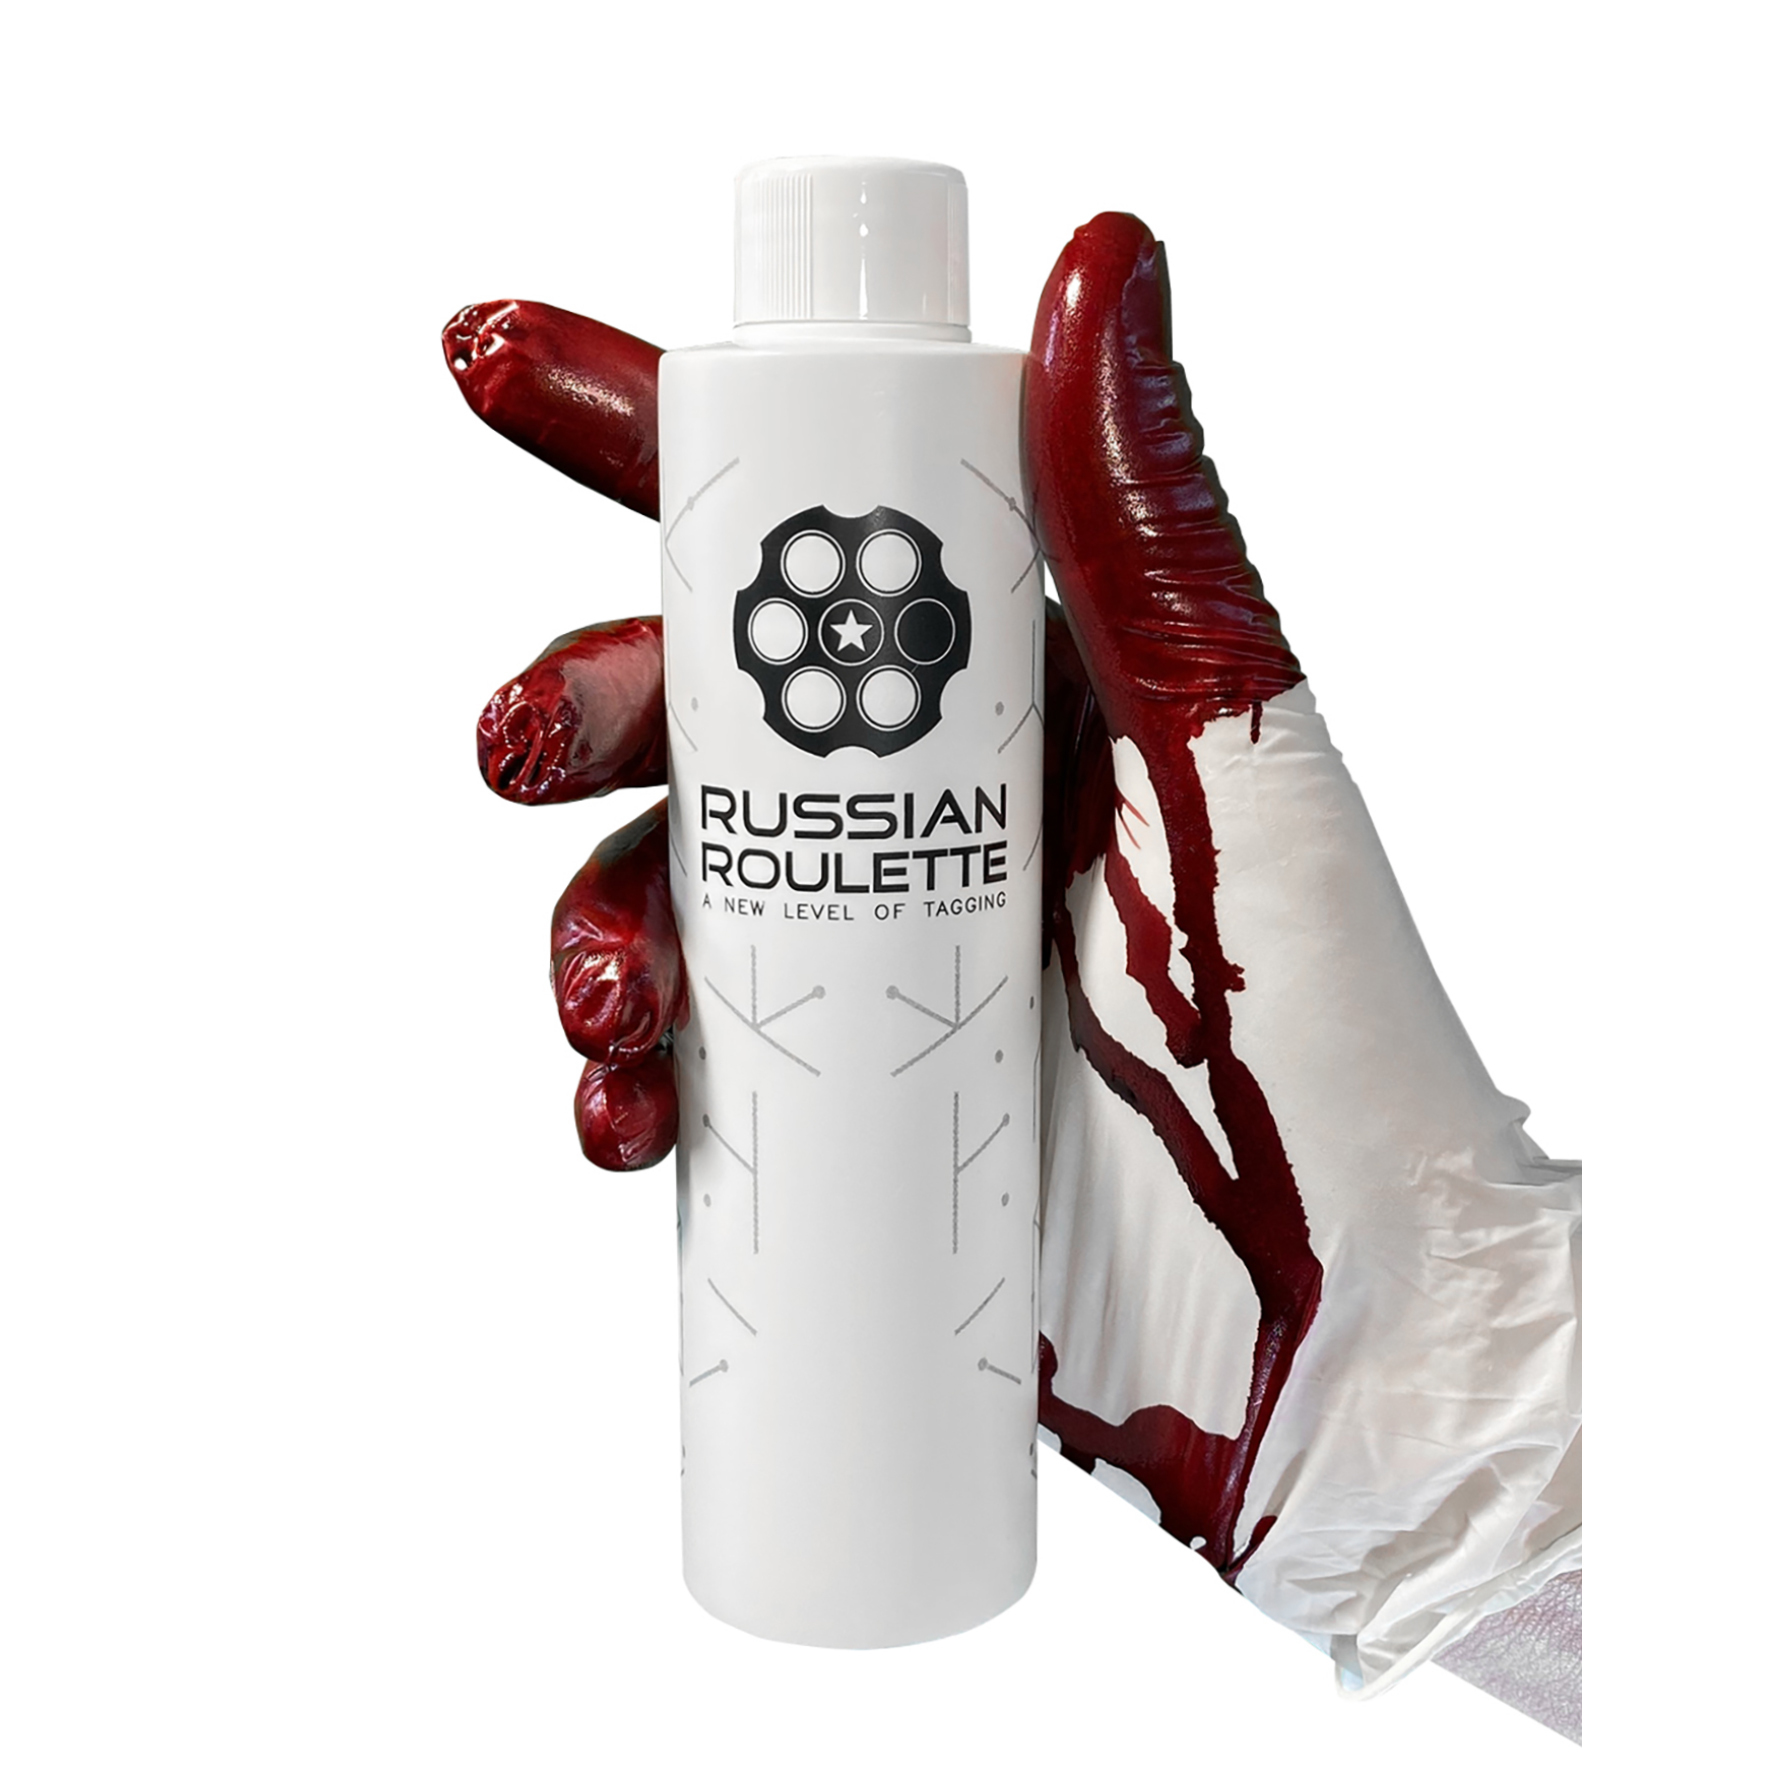 Заправка "Russian Roulette" Street Red, 200ml by 214 ink — ...